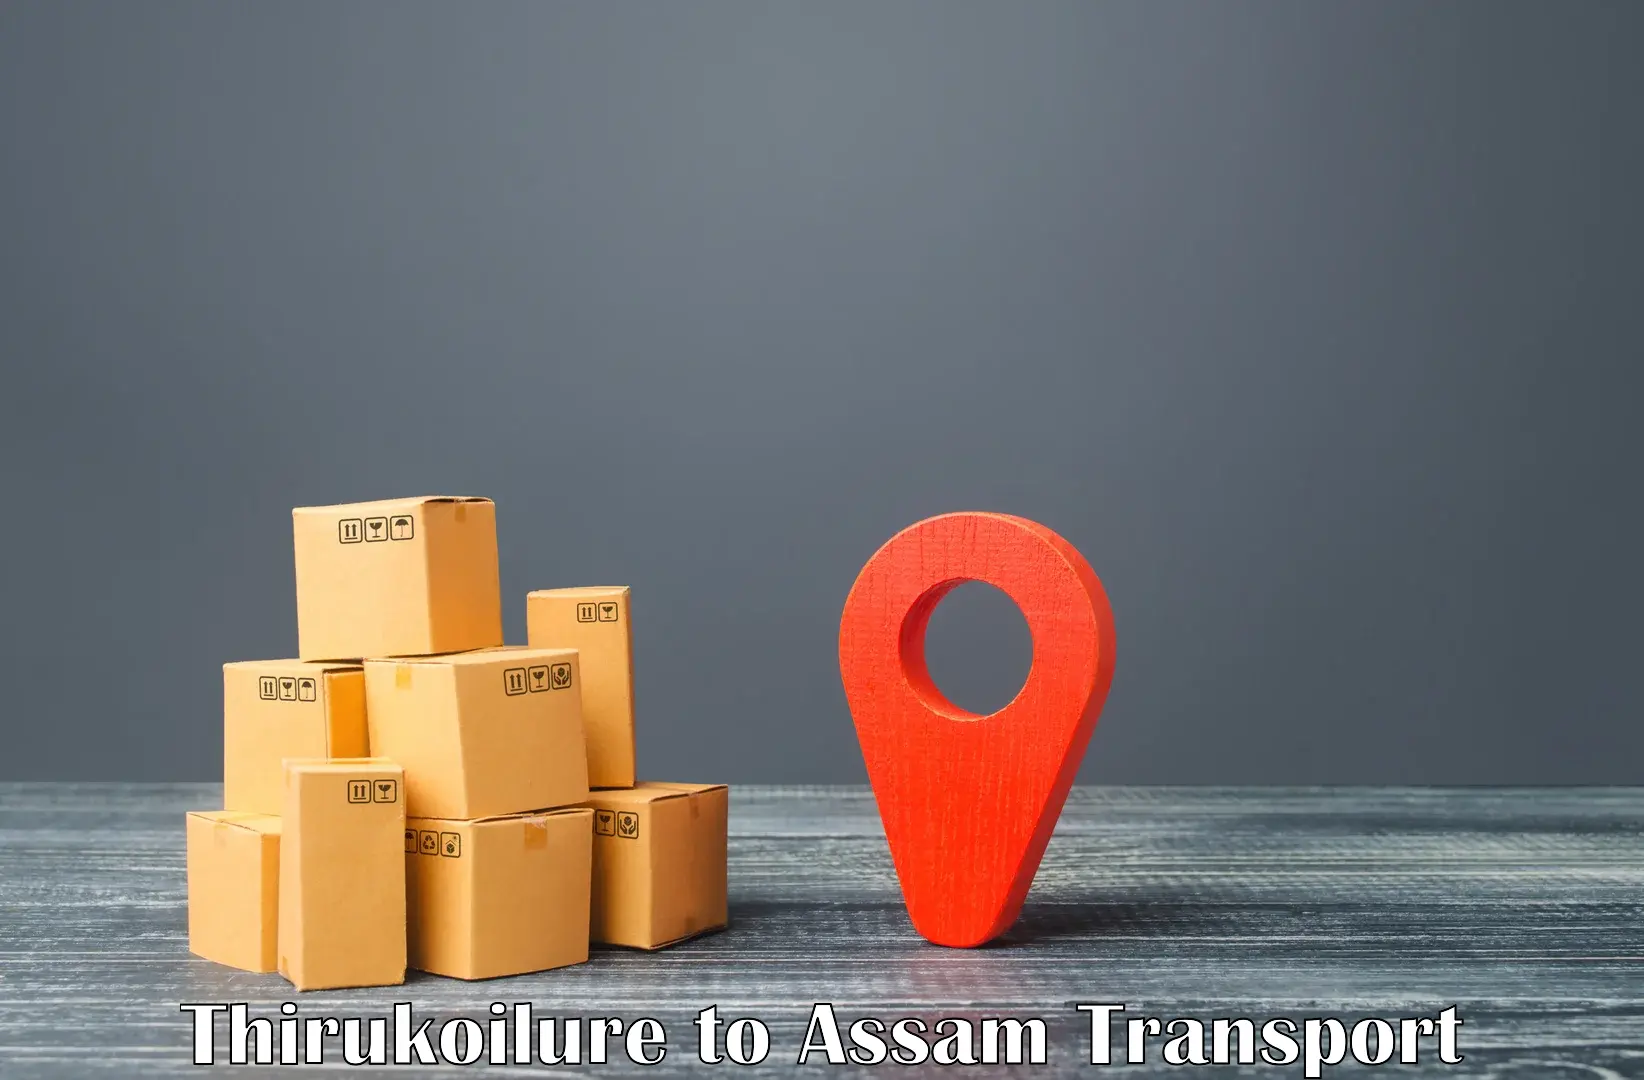 Container transport service Thirukoilure to Assam